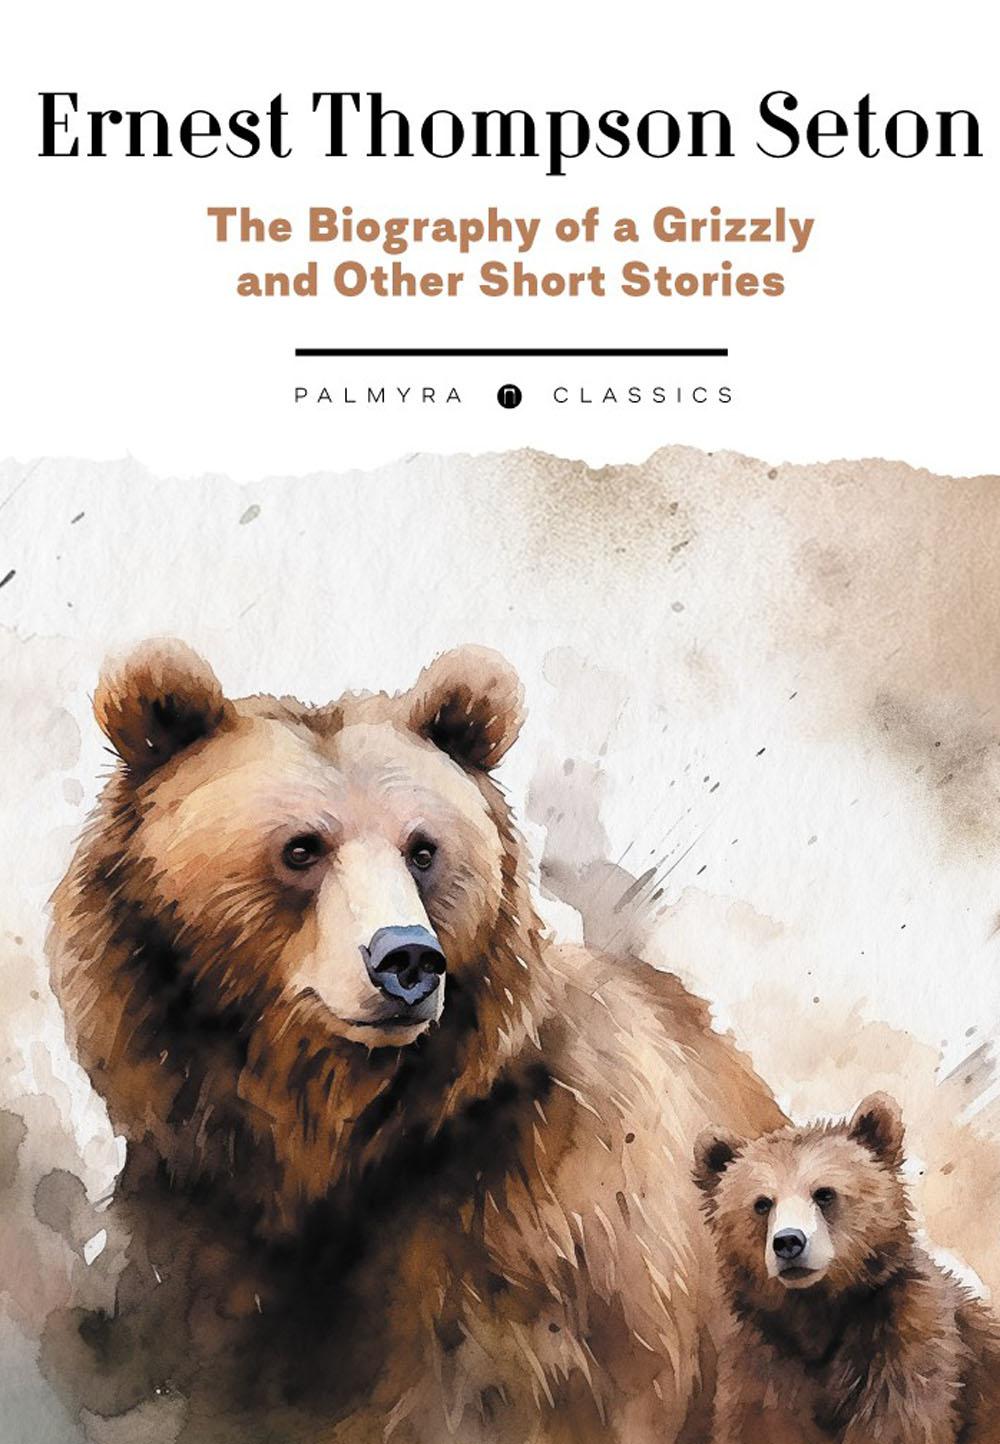 The Biography of a Grizzly and Other Short Stories:  .